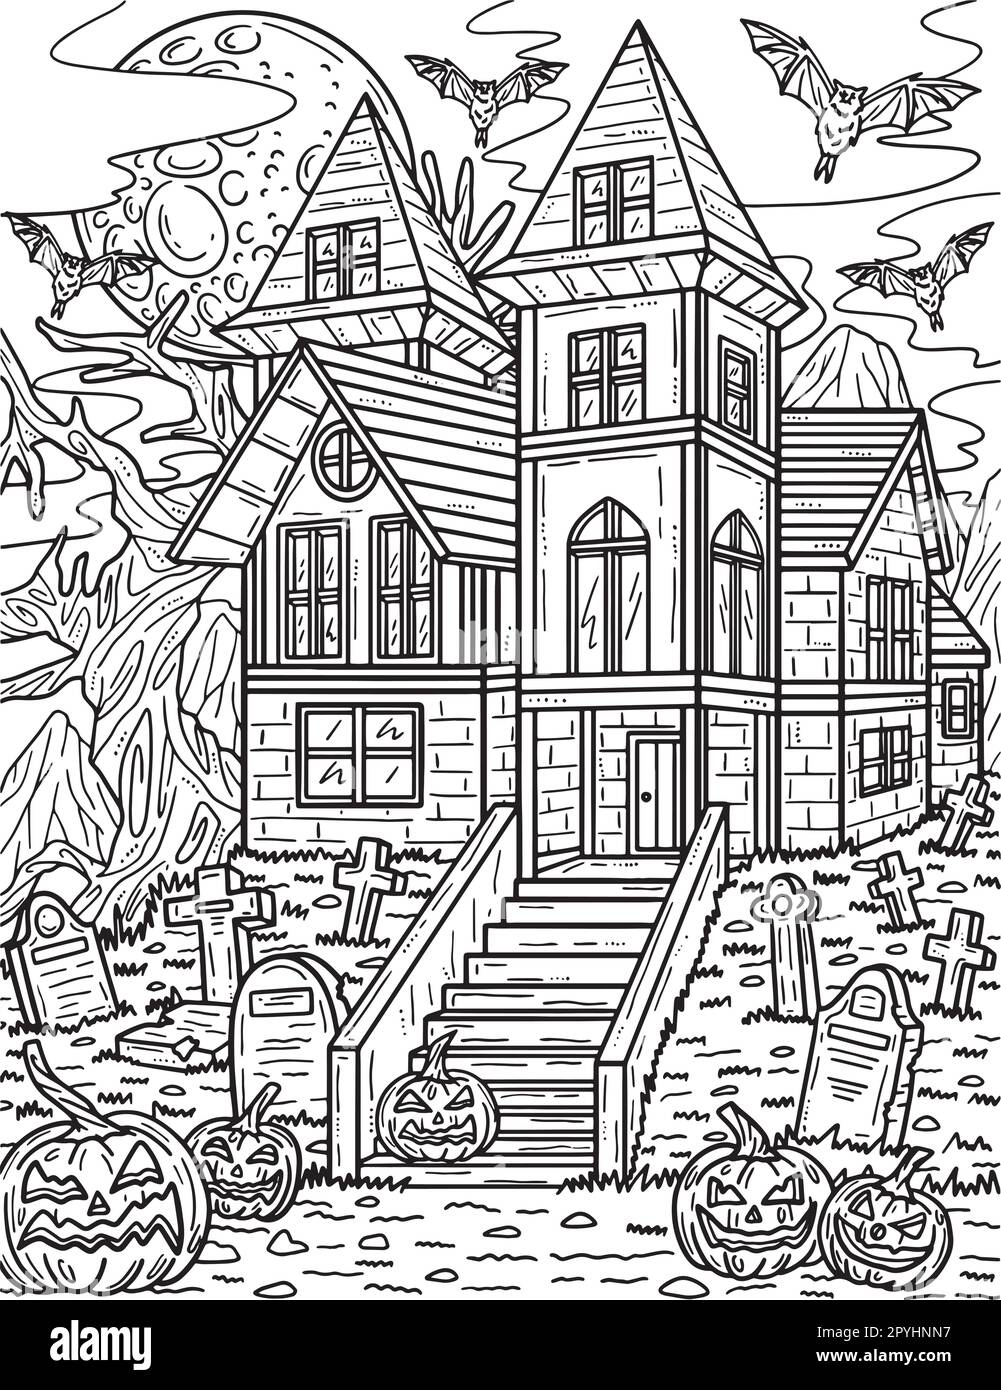 Halloween haunted house coloring page for adults stock vector image art